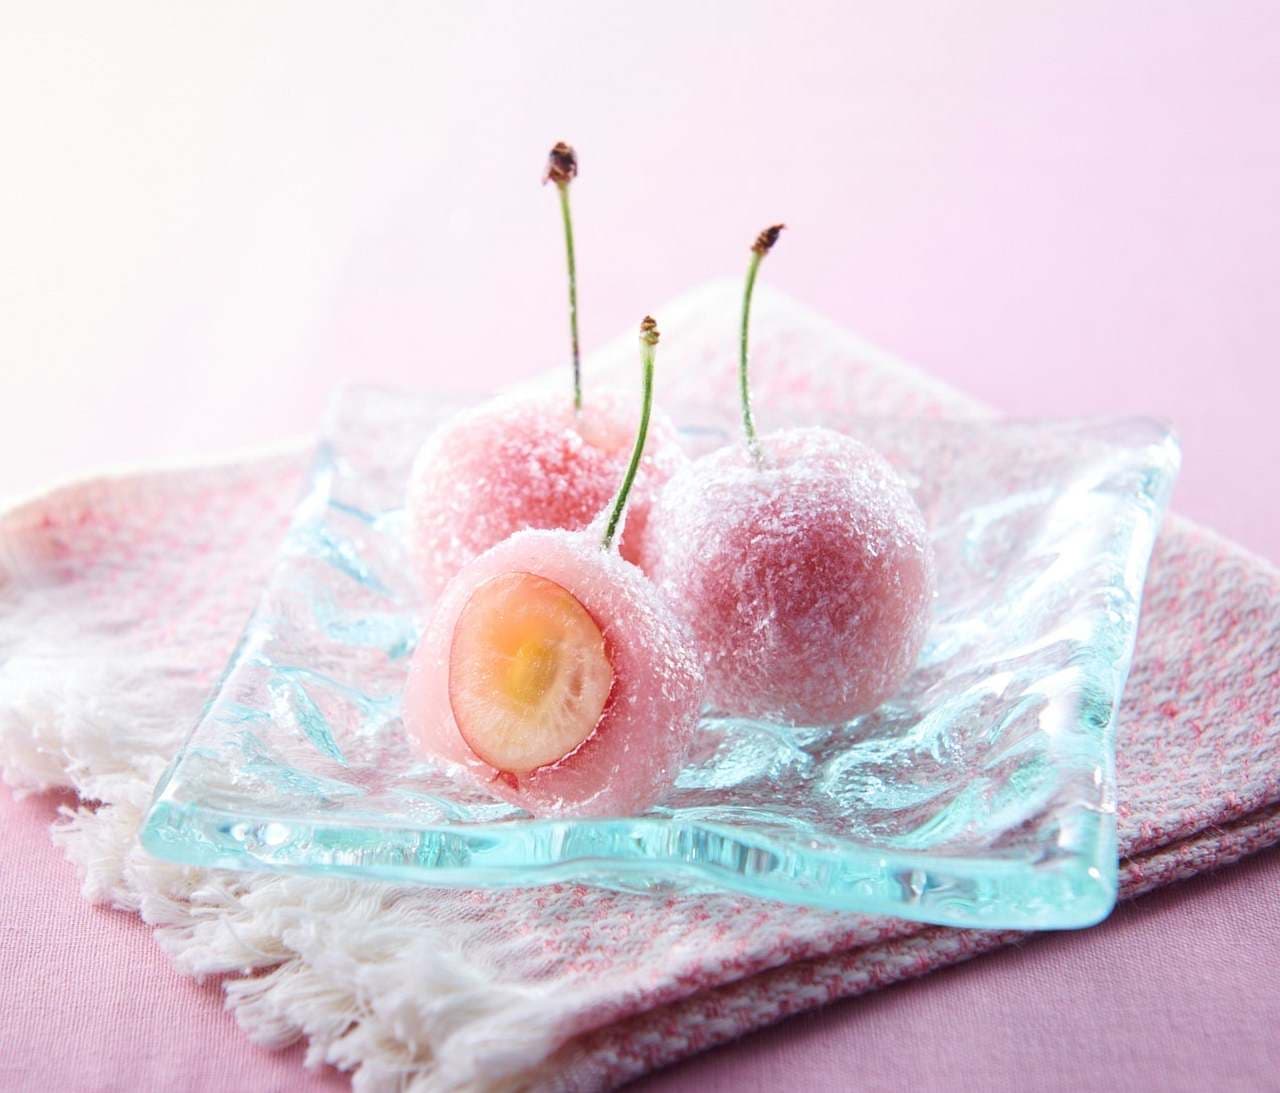 Chateraise "Cherry Mochi from Yamanashi Prefecture" and "Cherry Mochi from Sato Nishiki from Yamagata Prefecture"